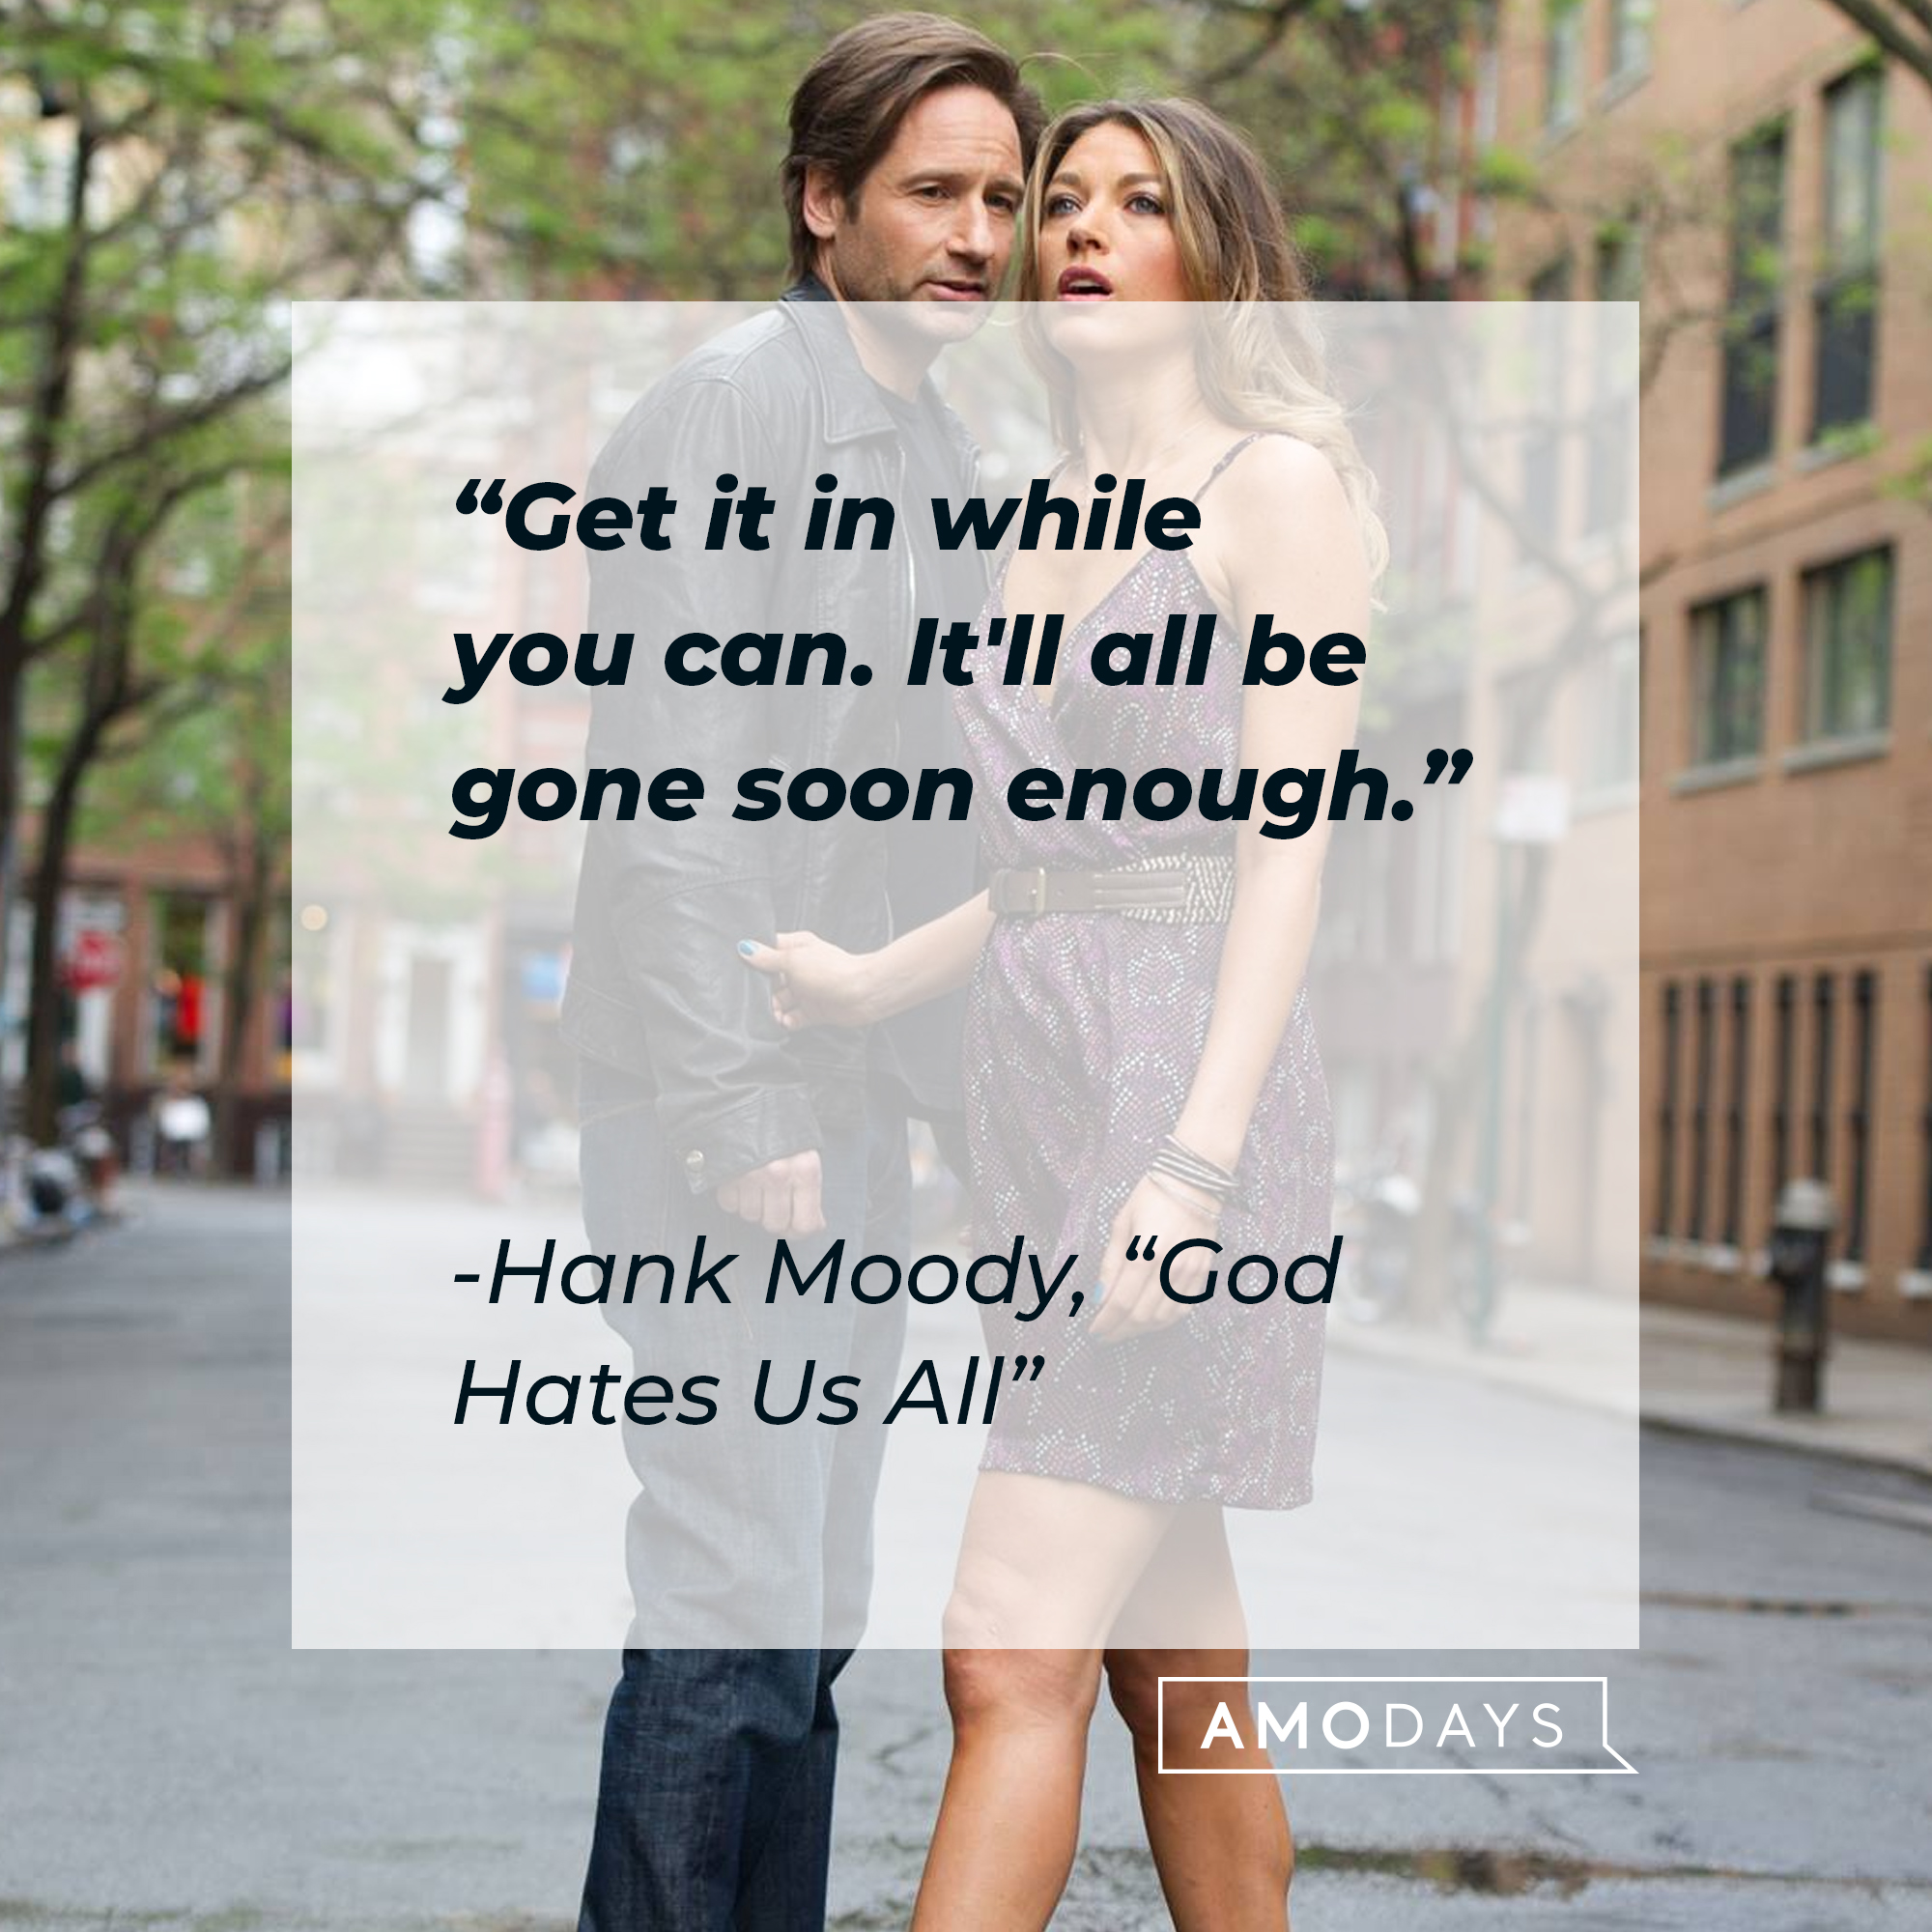 Hank Moody's quote: "Get it in while you can. It'll all be gone soon enough." | Image: AmoDays